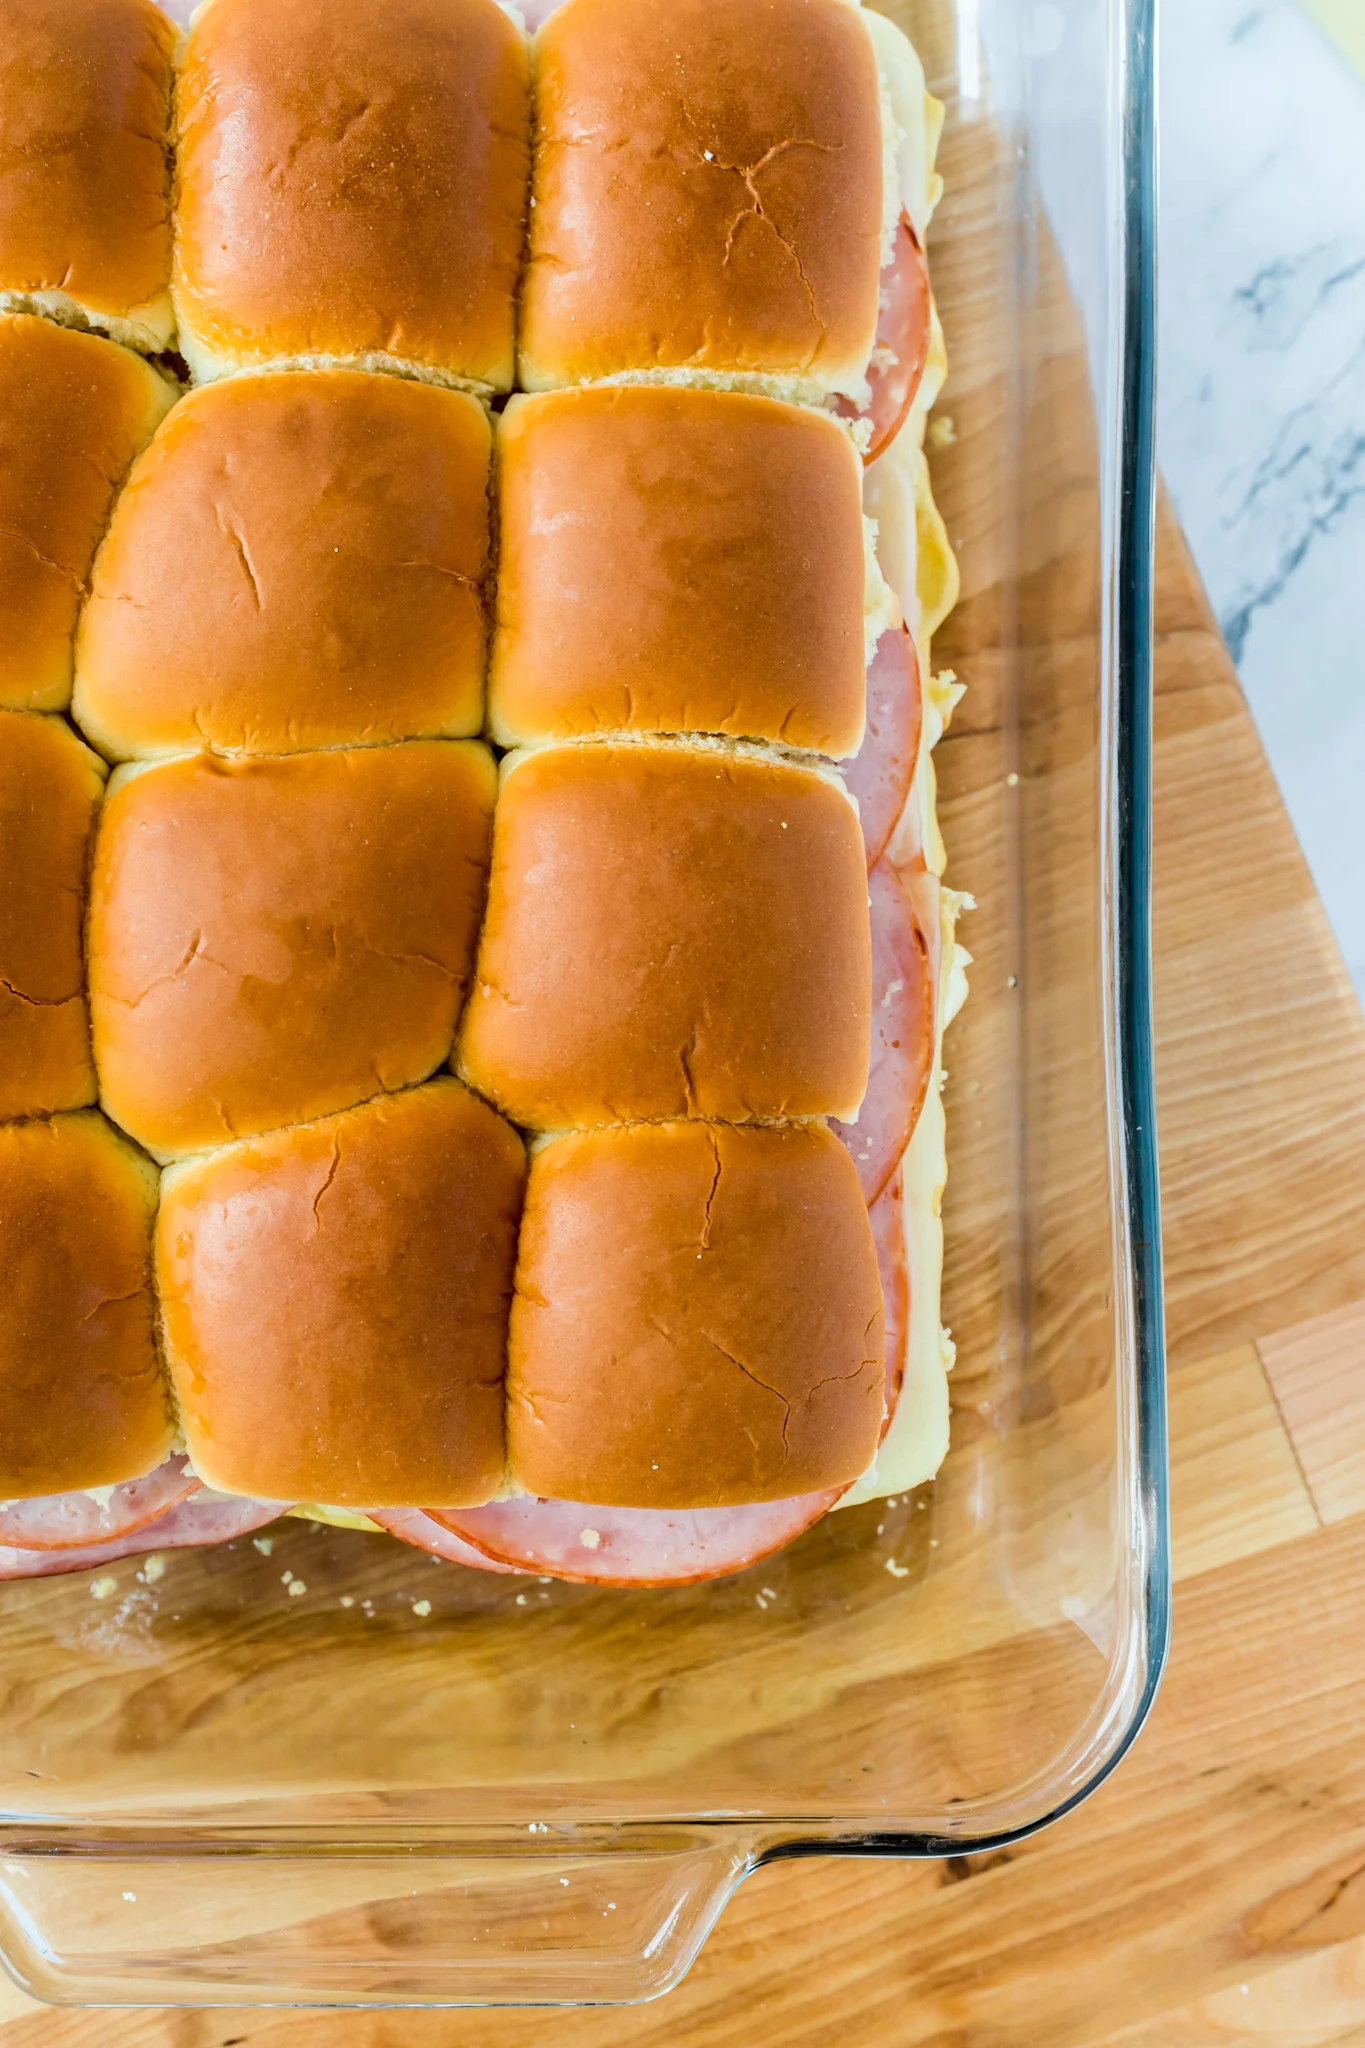 https://www.southerncravings.com/wp-content/uploads/2022/01/Ham-and-Cheese-Sliders-09.jpg.webp